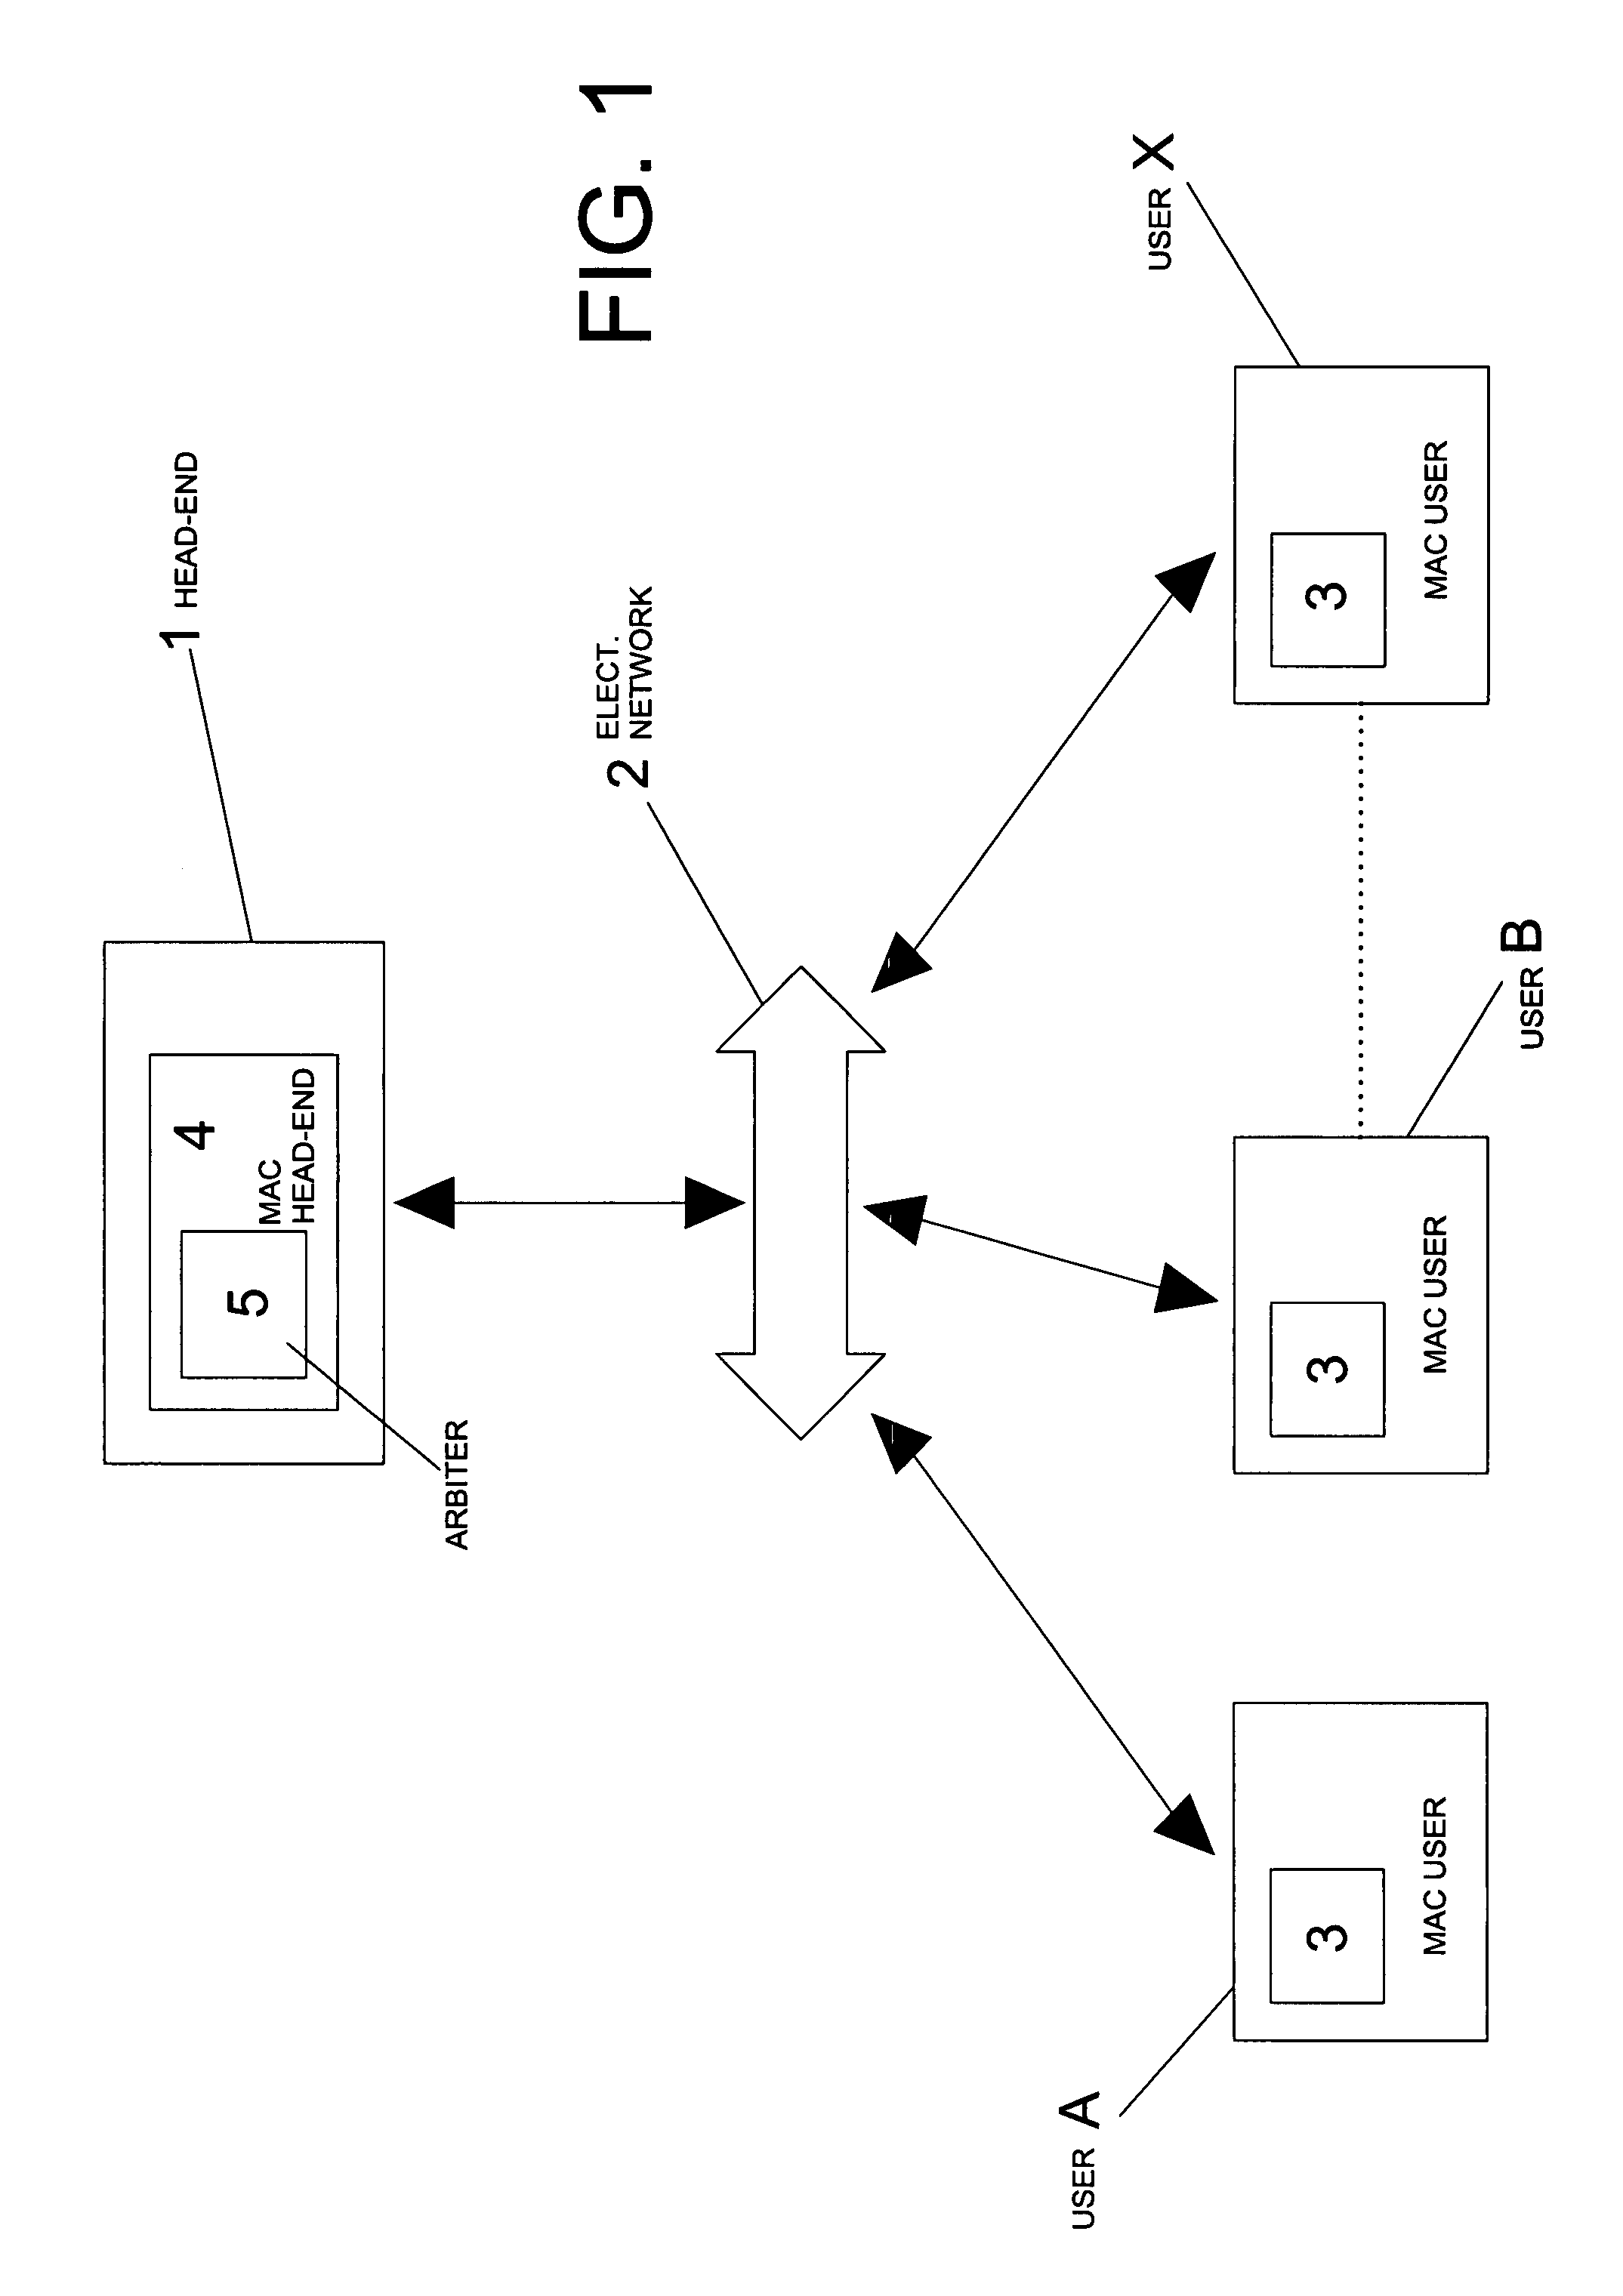 Process for multiple access and multiple transmission of data in a multi-user system for the point to multipoint digital transmission of data over the electricity network